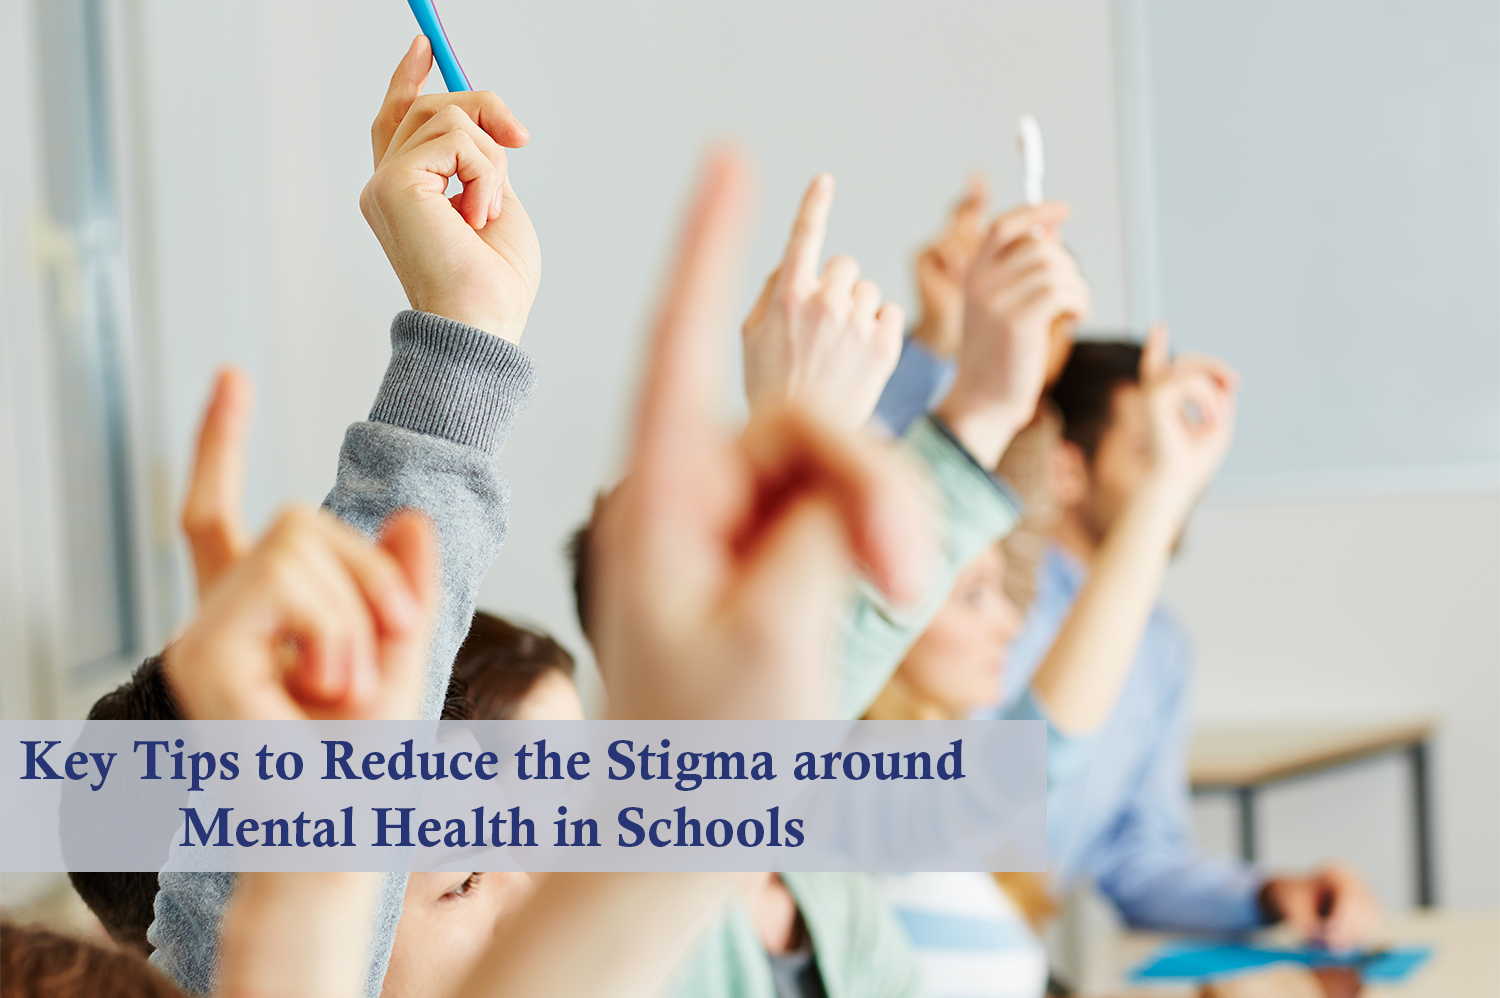 Anonymous students raising their hands in a classroom in an effort to fight the stigma around mental health.